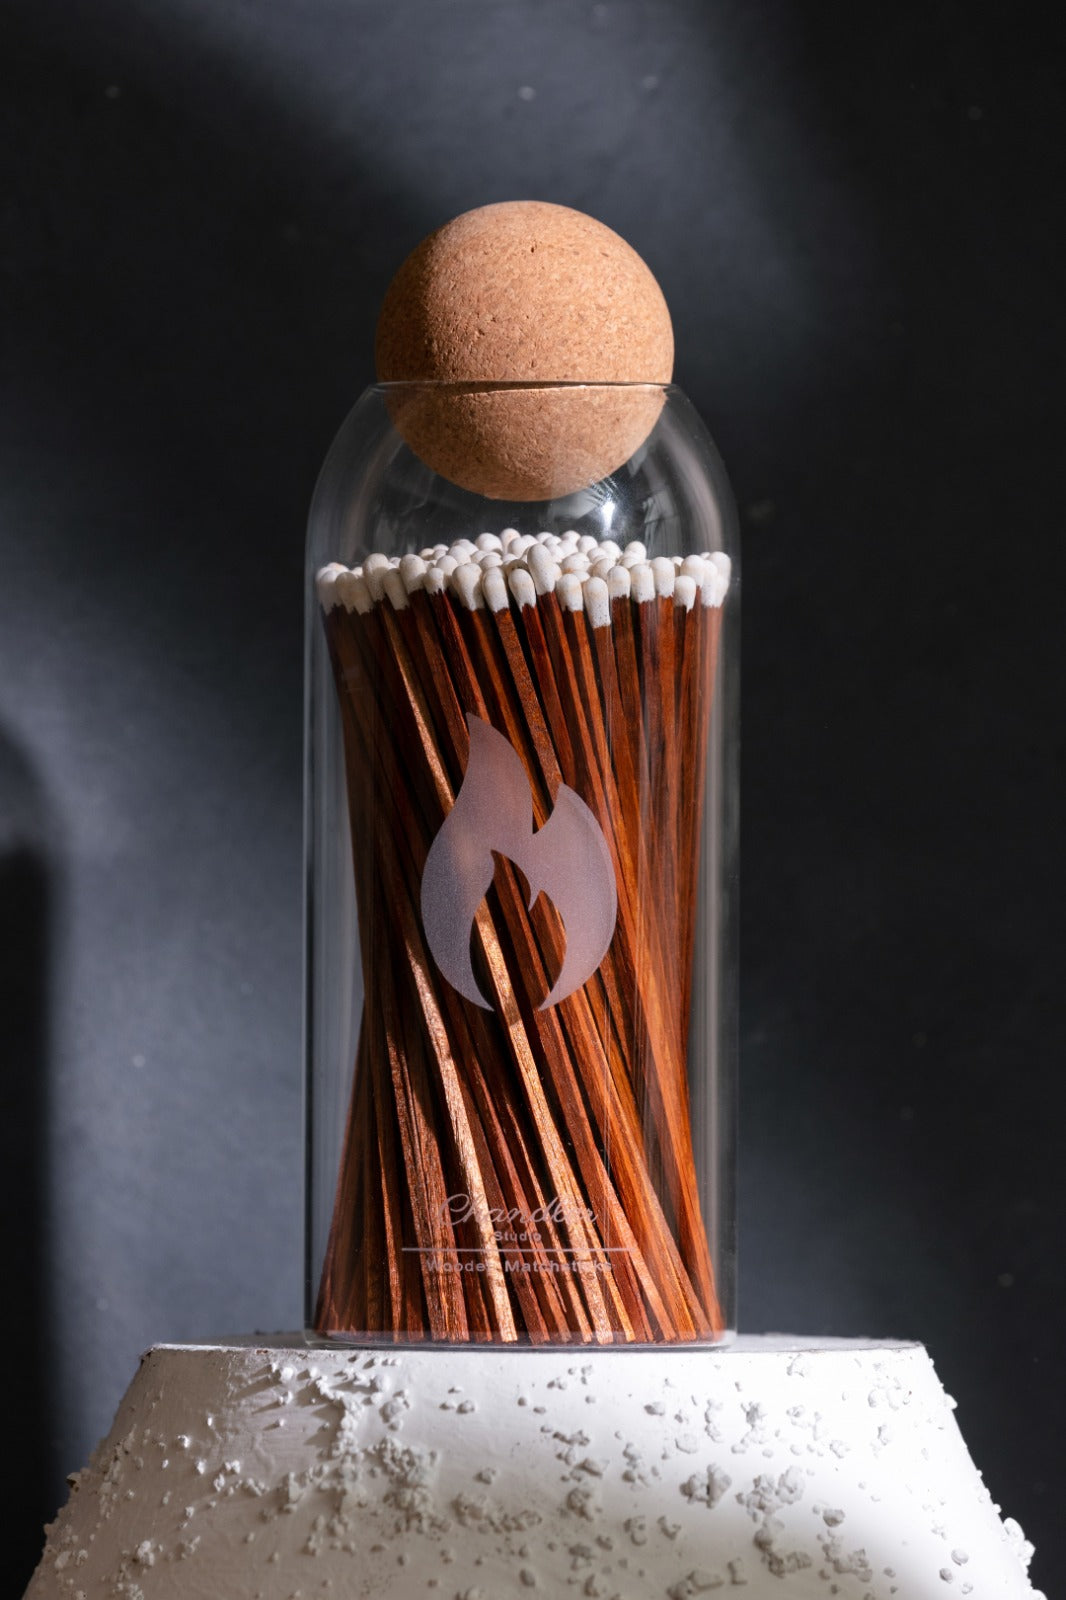 Fireplace - Candle Matches | Apothecary Decorative Glass Bottle - Approx. 210 Long Matchsticks in Jar